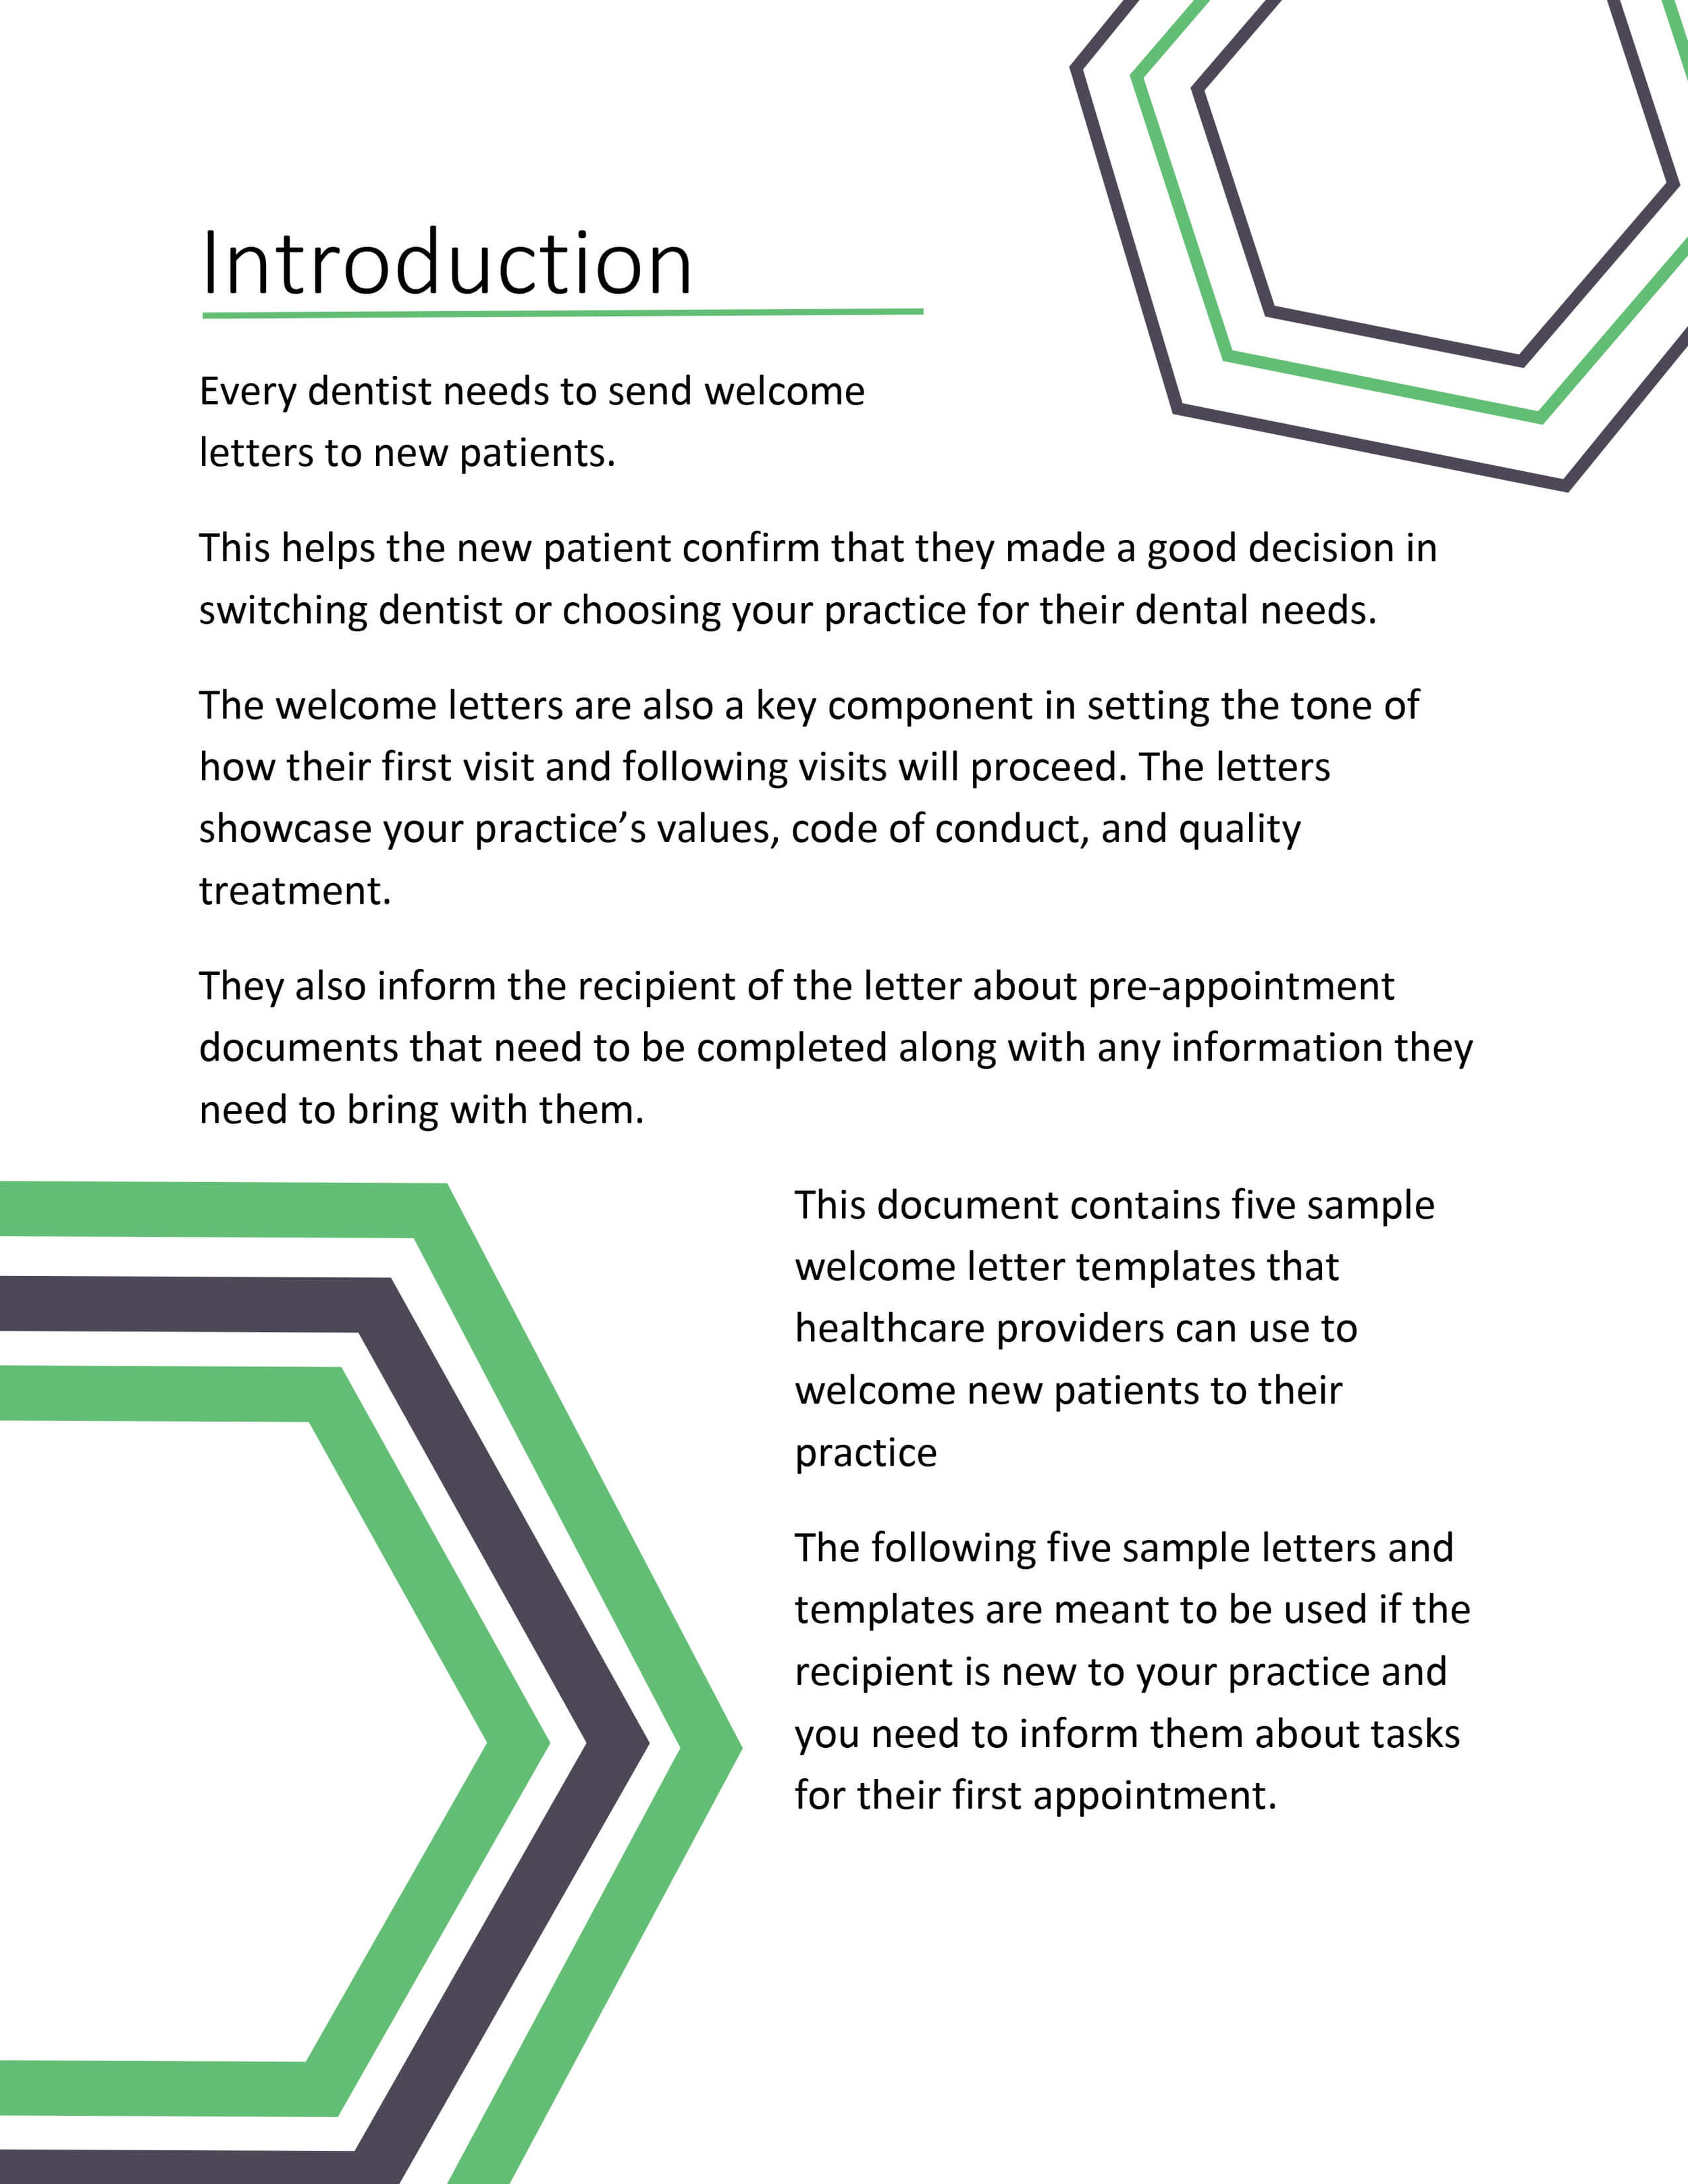 5 New Patient Welcome Letter Templates for Dentists-2.jpg